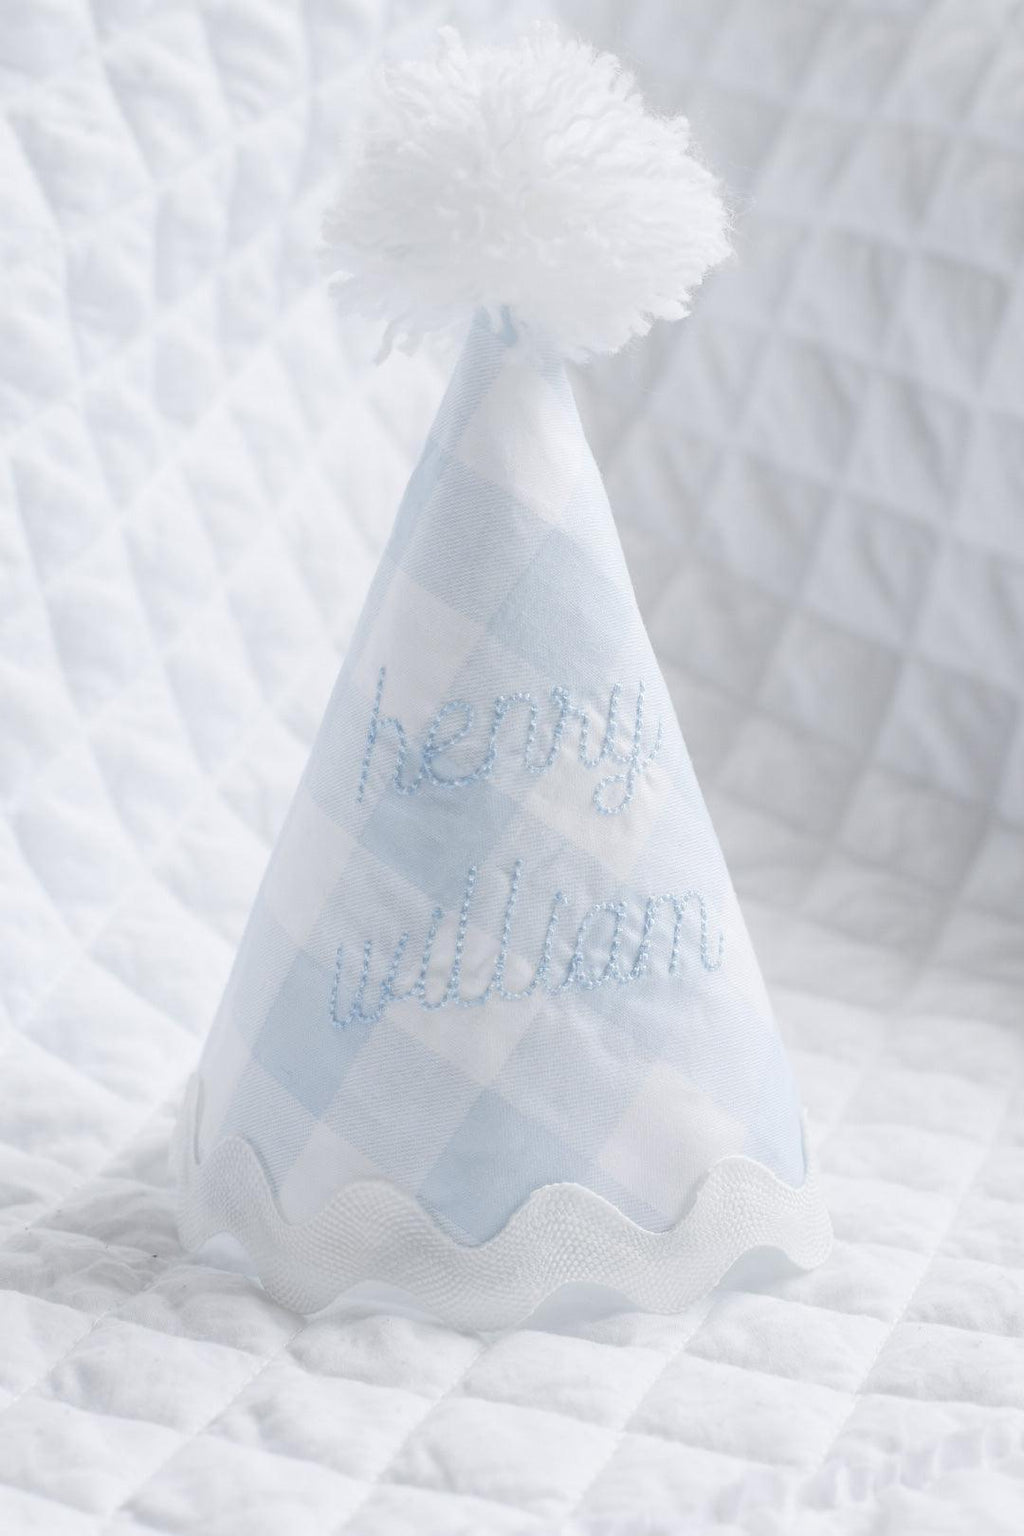 Party Hat - Blue Gingham | Nashville Bow Co. - Classic Hair Bows, Bow Ties, Basket Bows, Pacifier Clips, Wreath Sashes, Swaddle Bows. Classic Southern Charm.